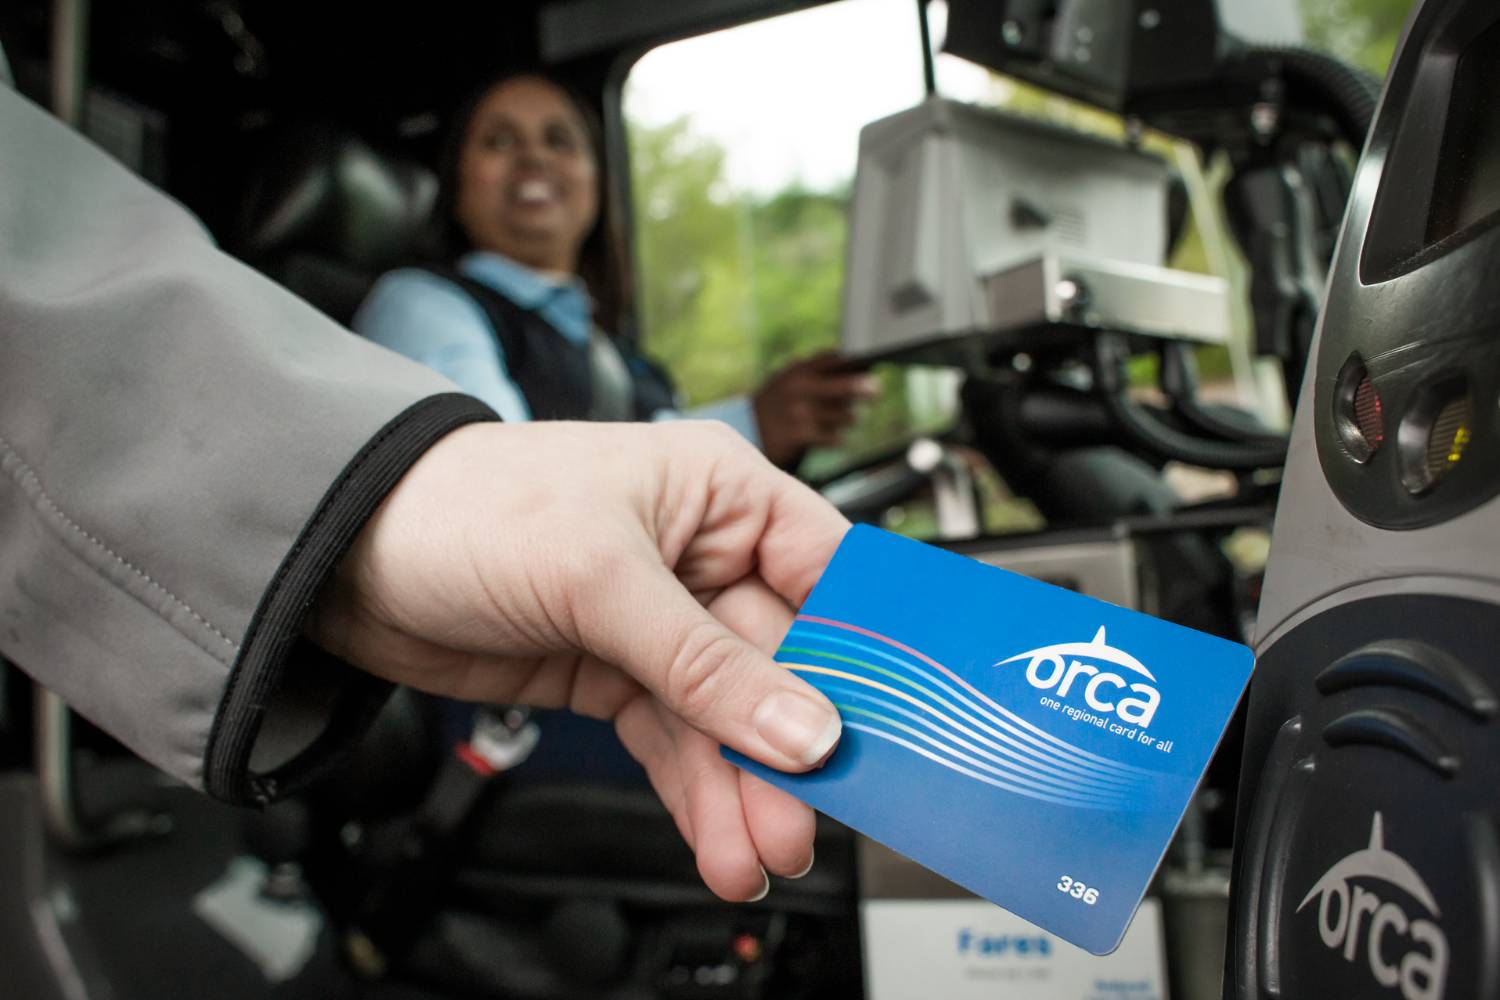 Woman's hand swipes ORCA card on scanner to pay fare as she boards CT bus